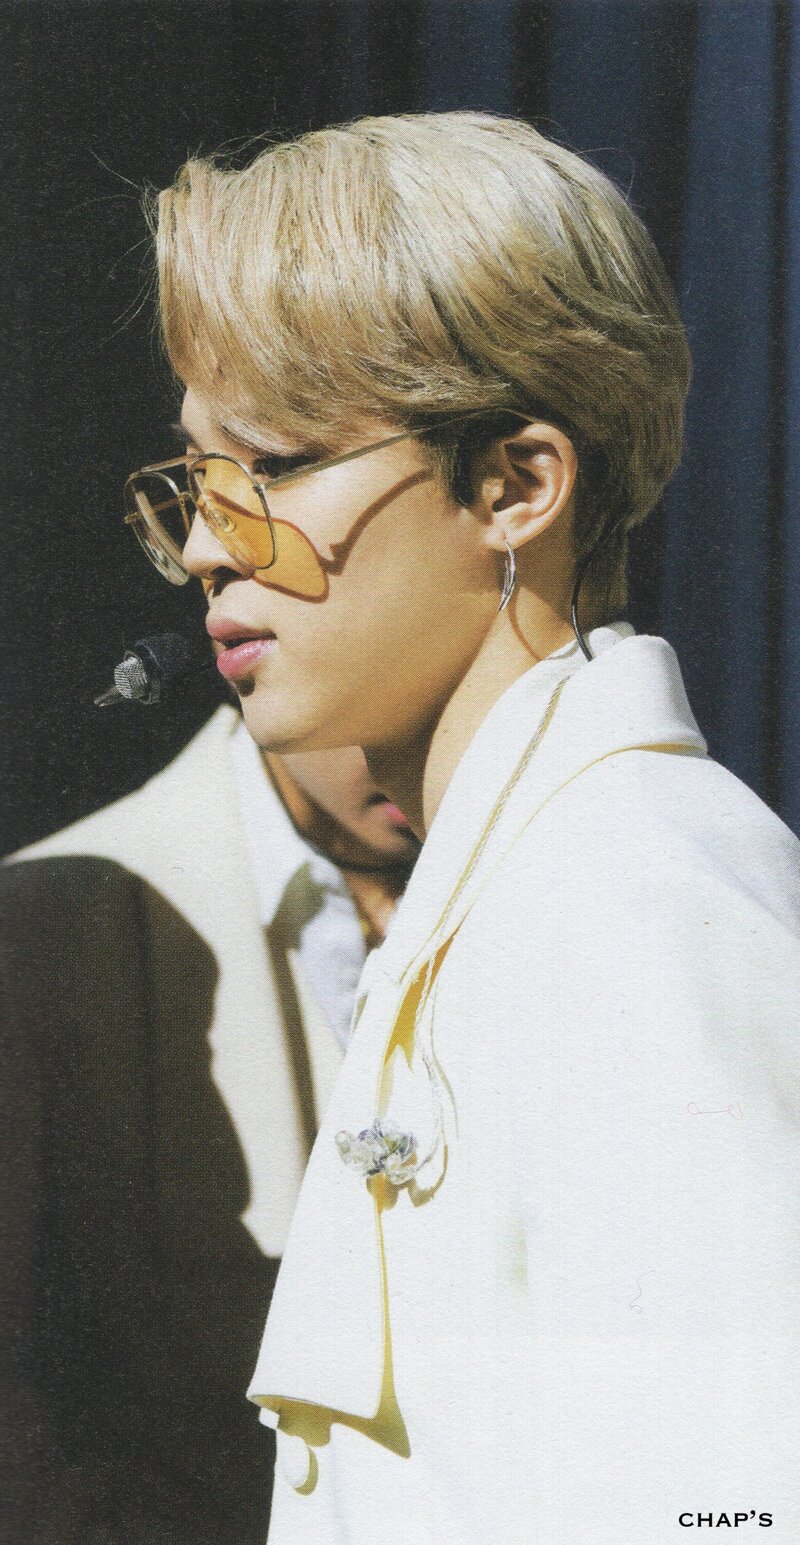 BTS Jimin - BEYOND THE STAGE Documentary Photobook 'THE DAY WE MEET' (Scans) documents 20